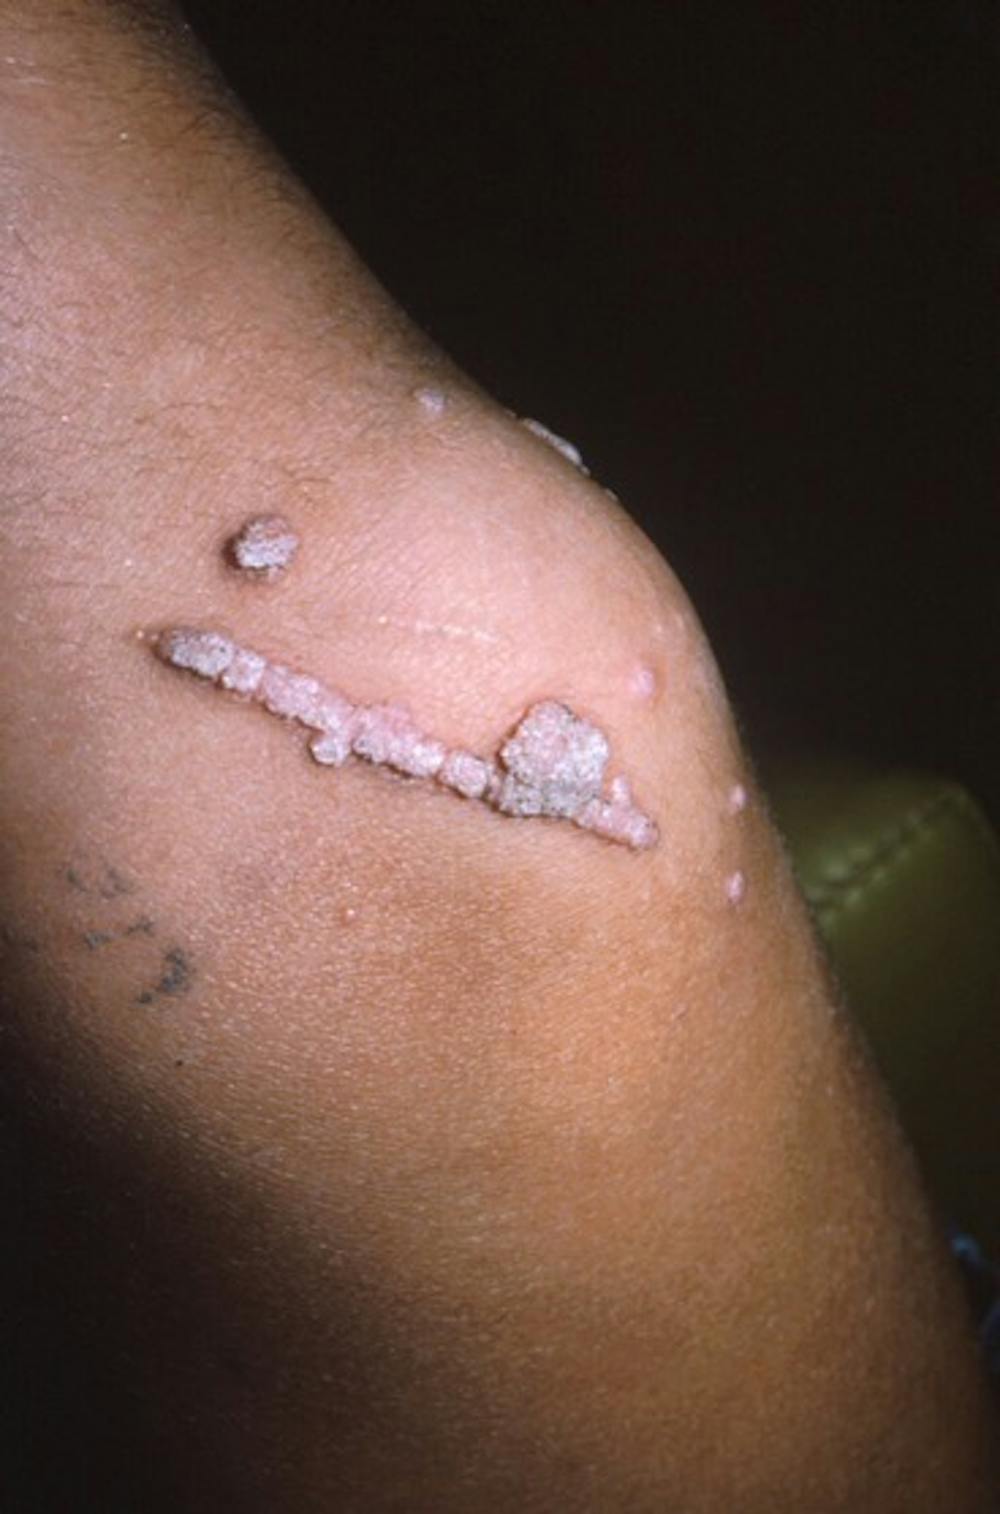 Hpv sensitive skin - Warts on hands and elbows